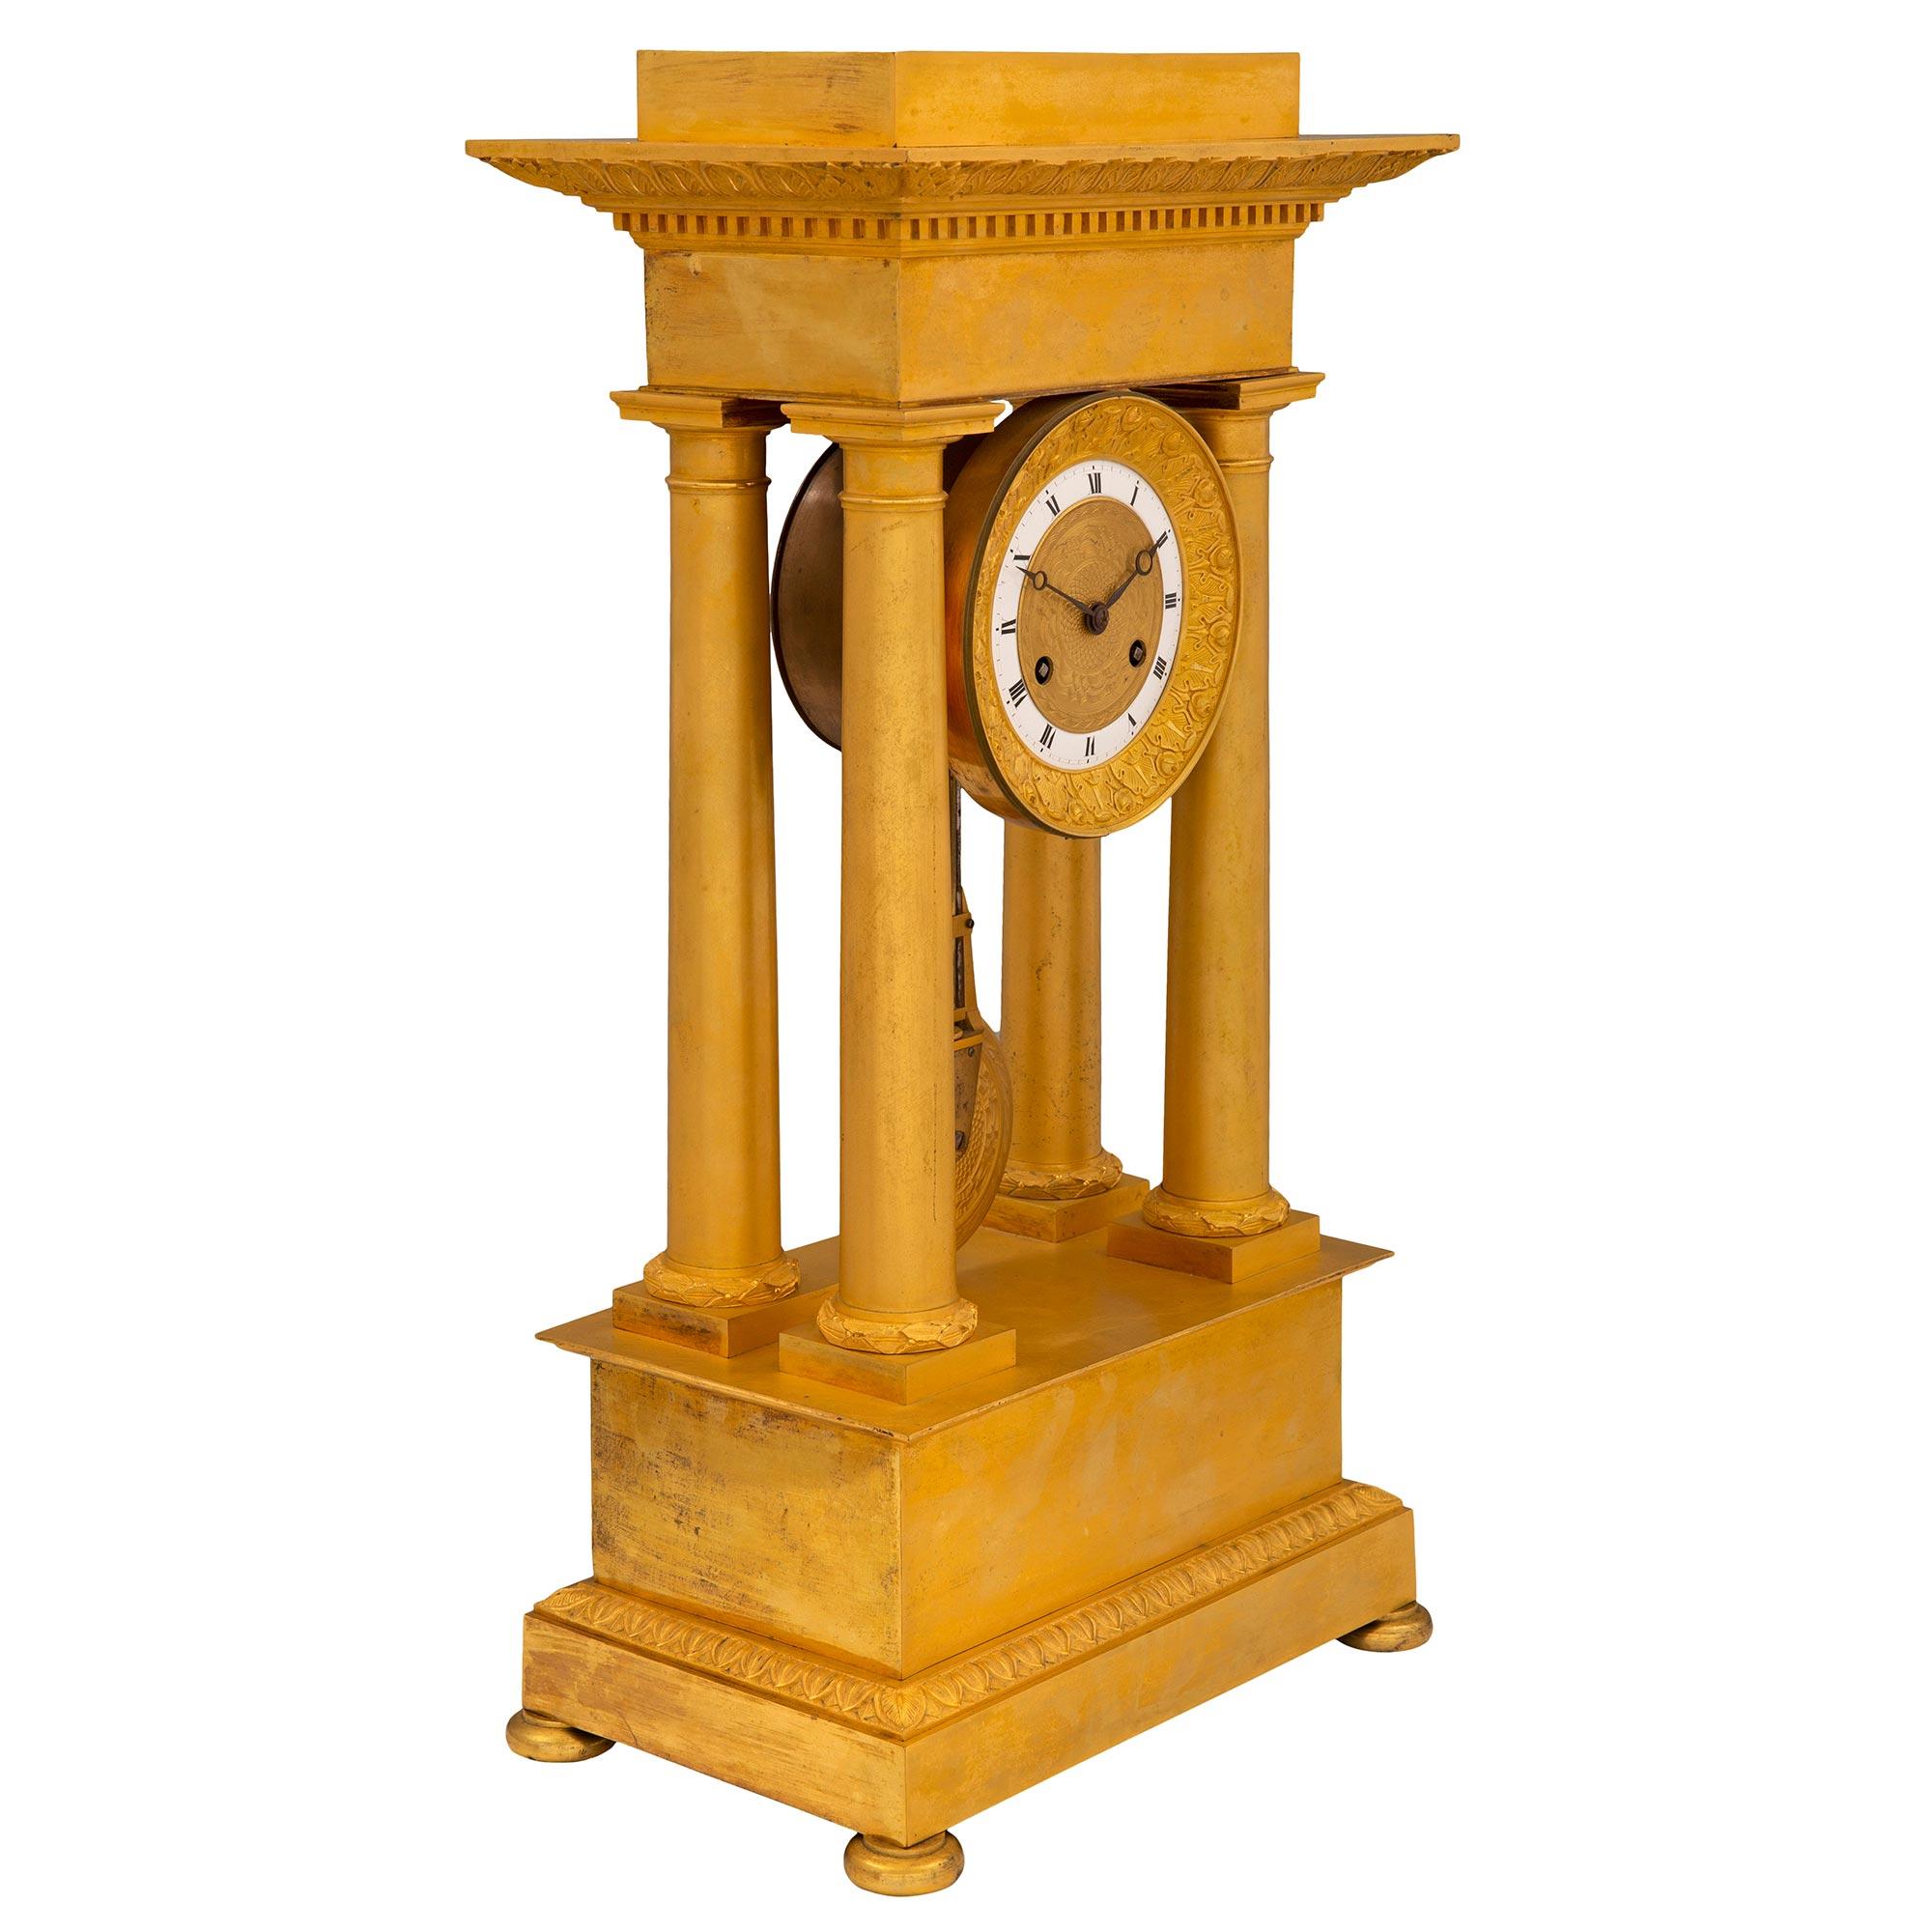 An exceptional French mid 19th century Charles X period ormolu portico clock. The clock is raised by fine bun feet below the rectangular base with an elegant mottled design and richly chased wrap around Coeur de Rai band. At the center are four